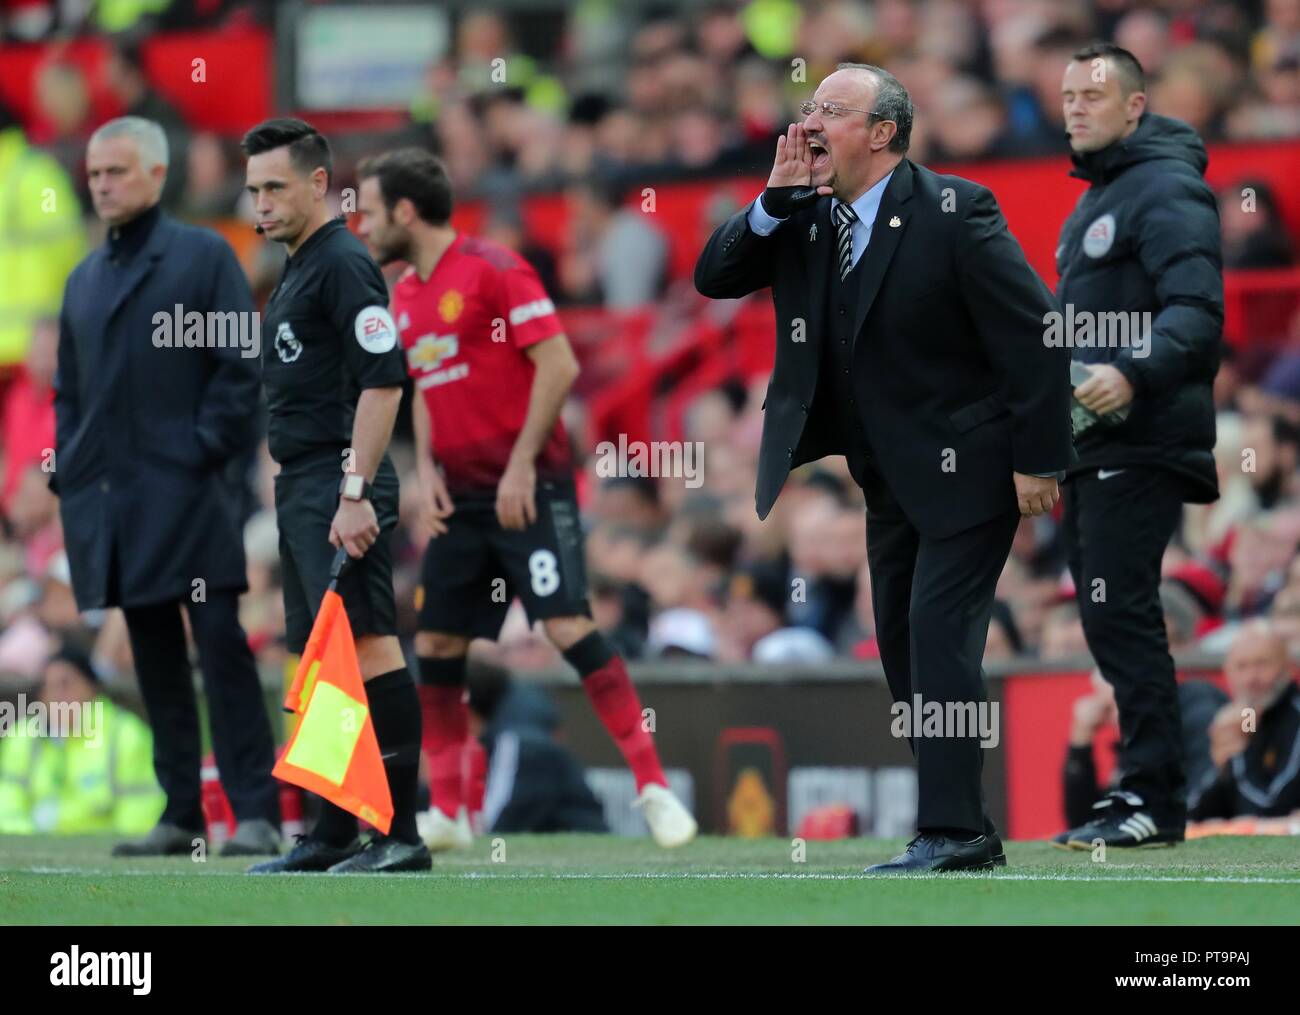 JOSE MOURINHO, JUAN MATA & RAFA BENITEZ MANCHESTER UNITED FC V NEWCASTLE UNITED FC MANCHESTER UNITED FC V NEWCASTLE UNITED FC OLD TRAFFORD, MANCHESTER, ENGLAND 06 October 2018 GBD12368 STRICTLY EDITORIAL USE ONLY. If The Player/Players Depicted In This Image Is/Are Playing For An English Club Or The England National Team. Then This Image May Only Be Used For Editorial Purposes. No Commercial Use. The Following Usages Are Also Restricted EVEN IF IN AN EDITORIAL CONTEXT: Use in conjuction with, or part of, any unauthorized audio, video, data, fixture lists, club/league logos, Stock Photo